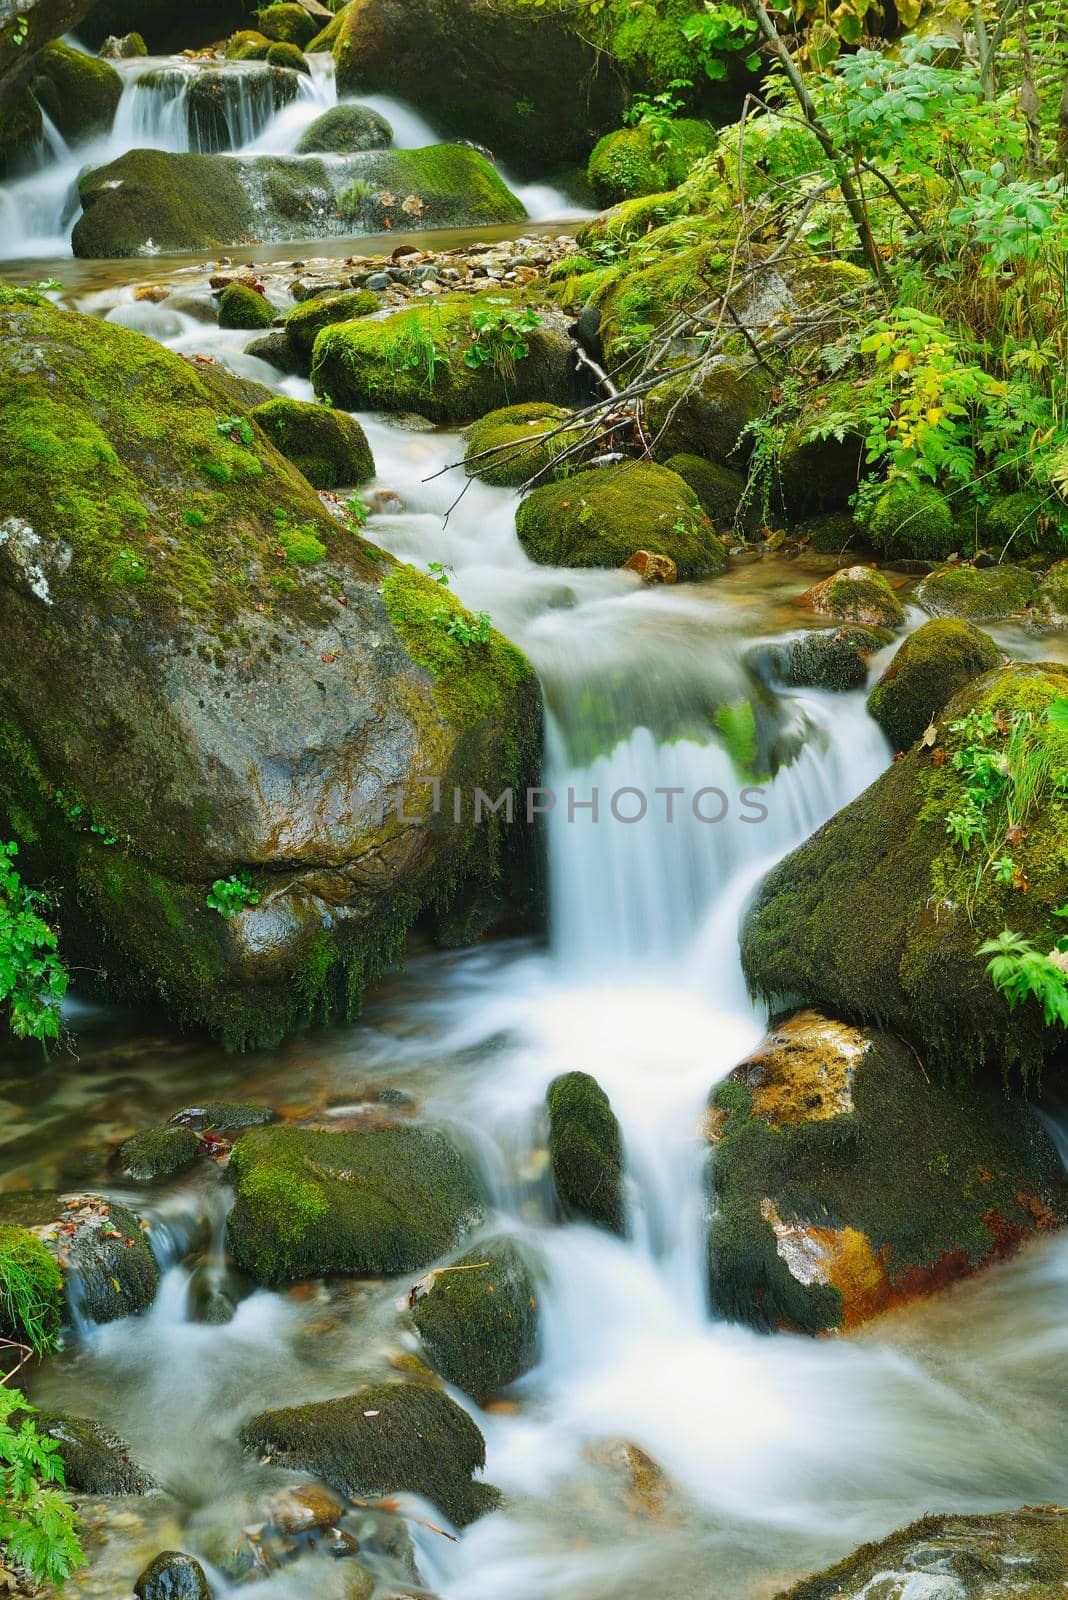 mountain forest landscapecreek with fresh water